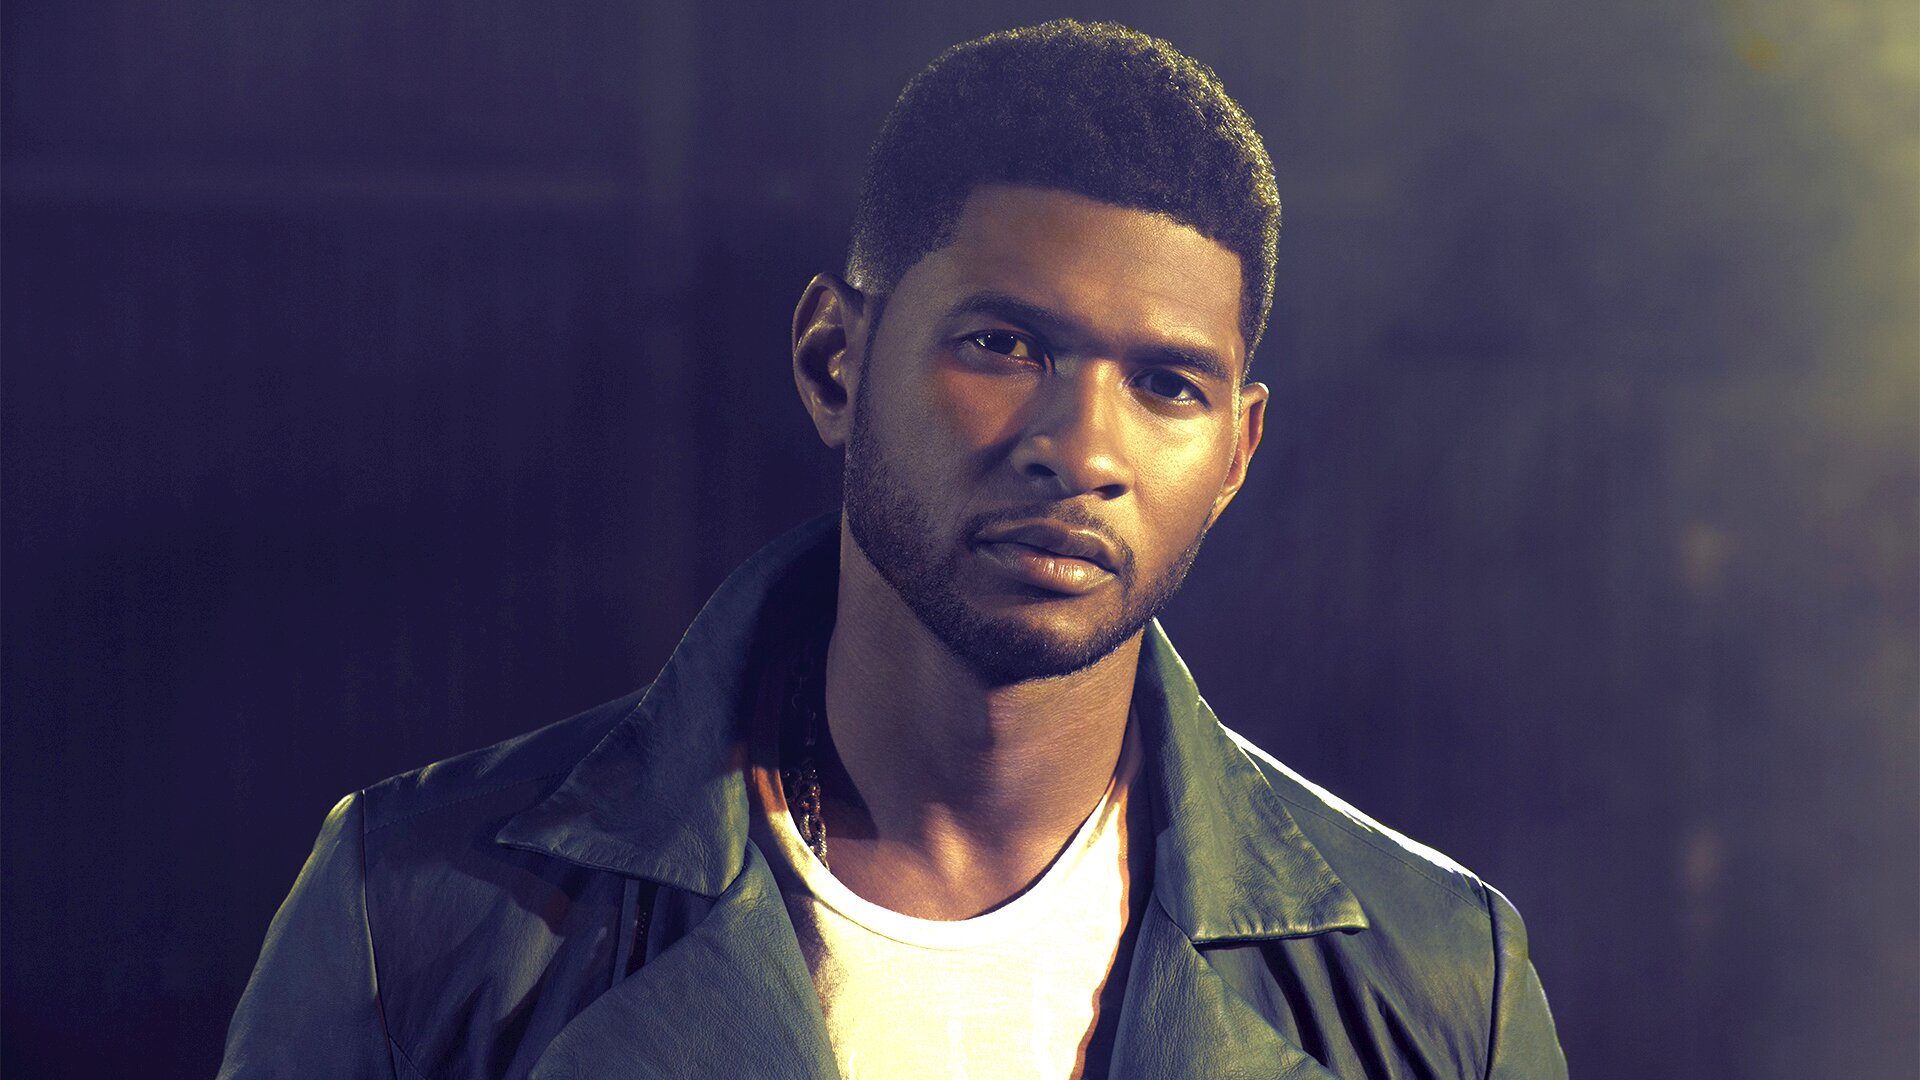 Usher at Park Theater